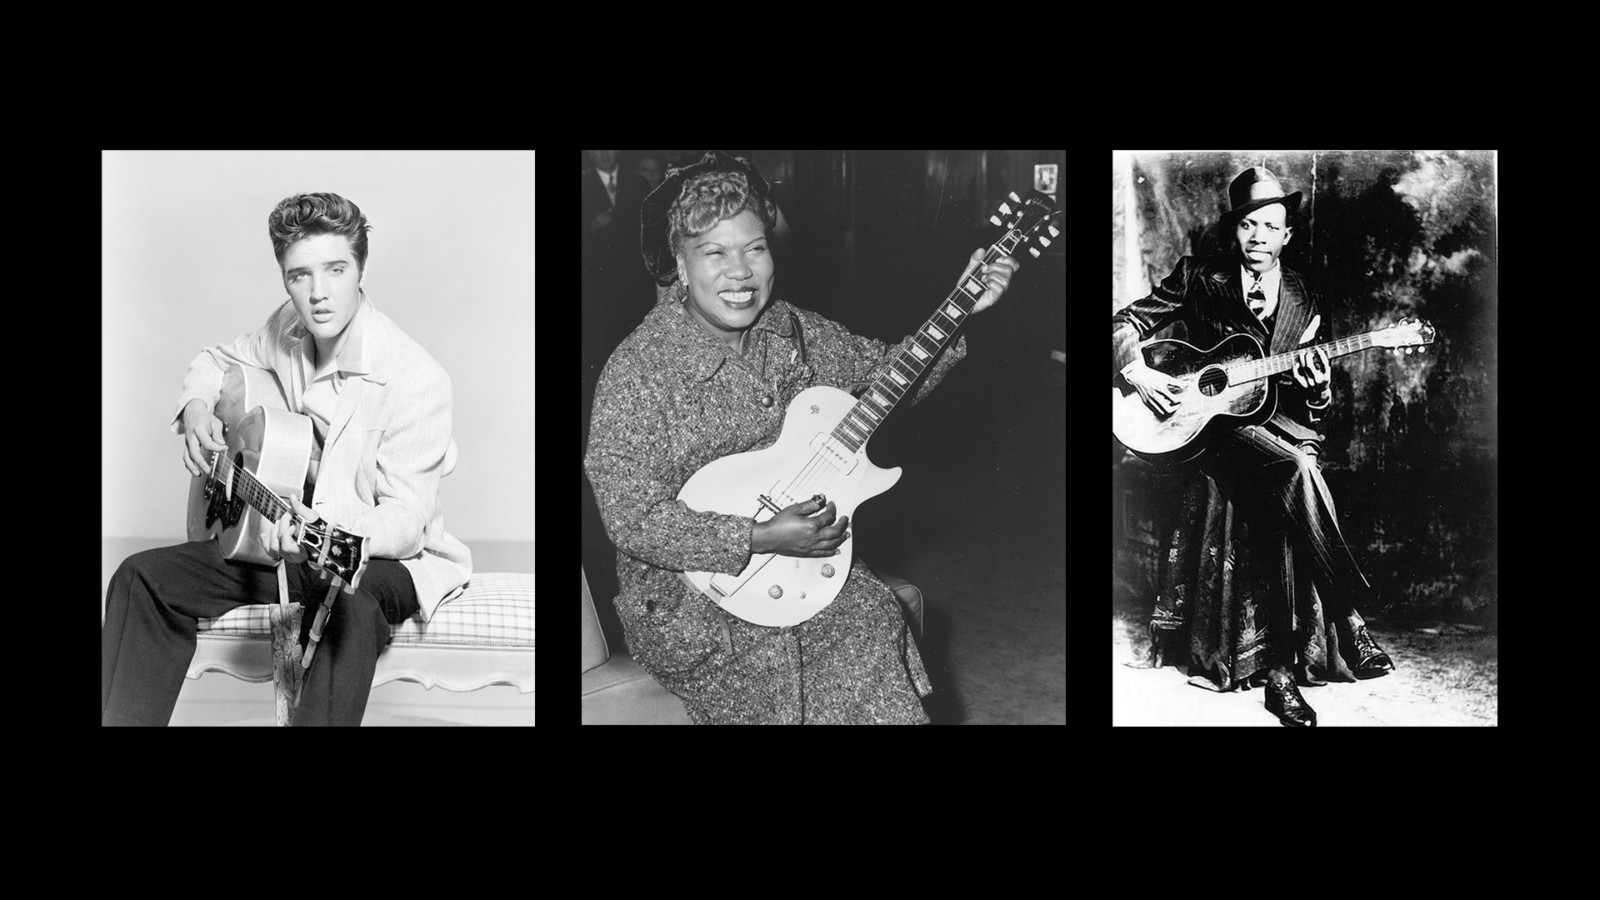 Three black and white images in a row of musicians sitting down holding guitars. From left to right; Elvis Presley Sister Rosetta Tharpe, Robert Johnson.